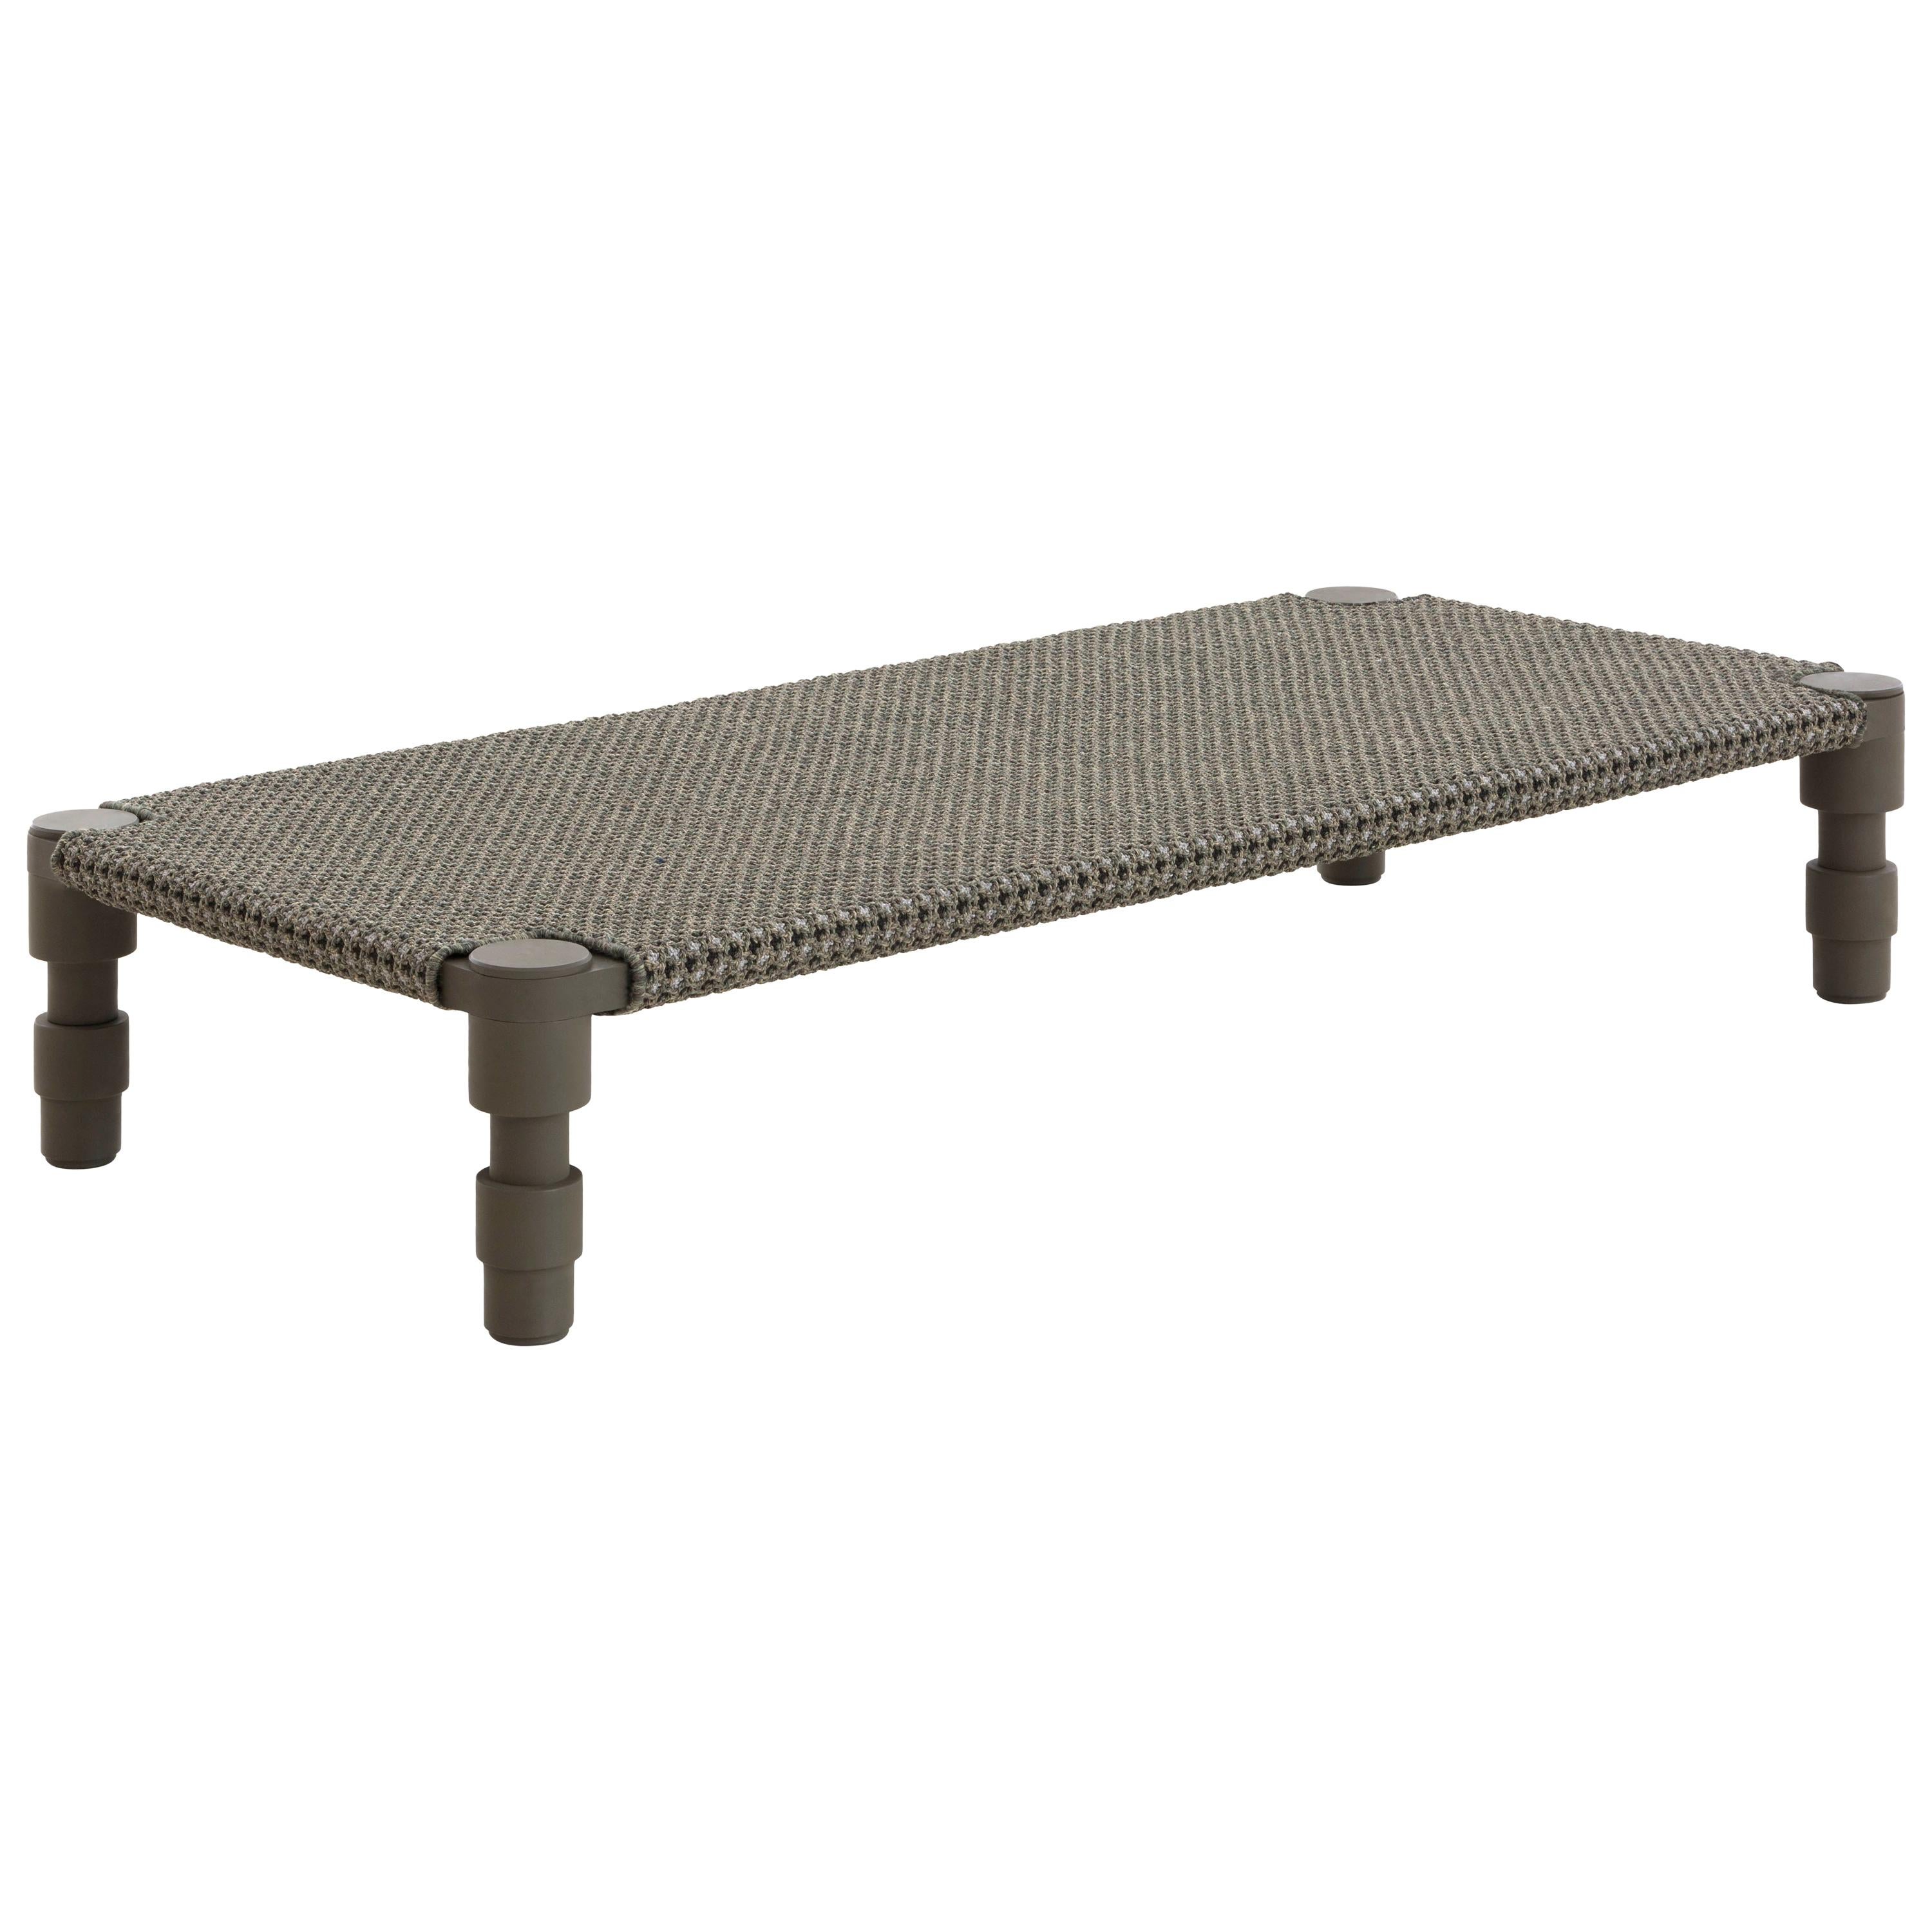 (Green) GAN Garden Layers Double Indian Bed Coffee Table